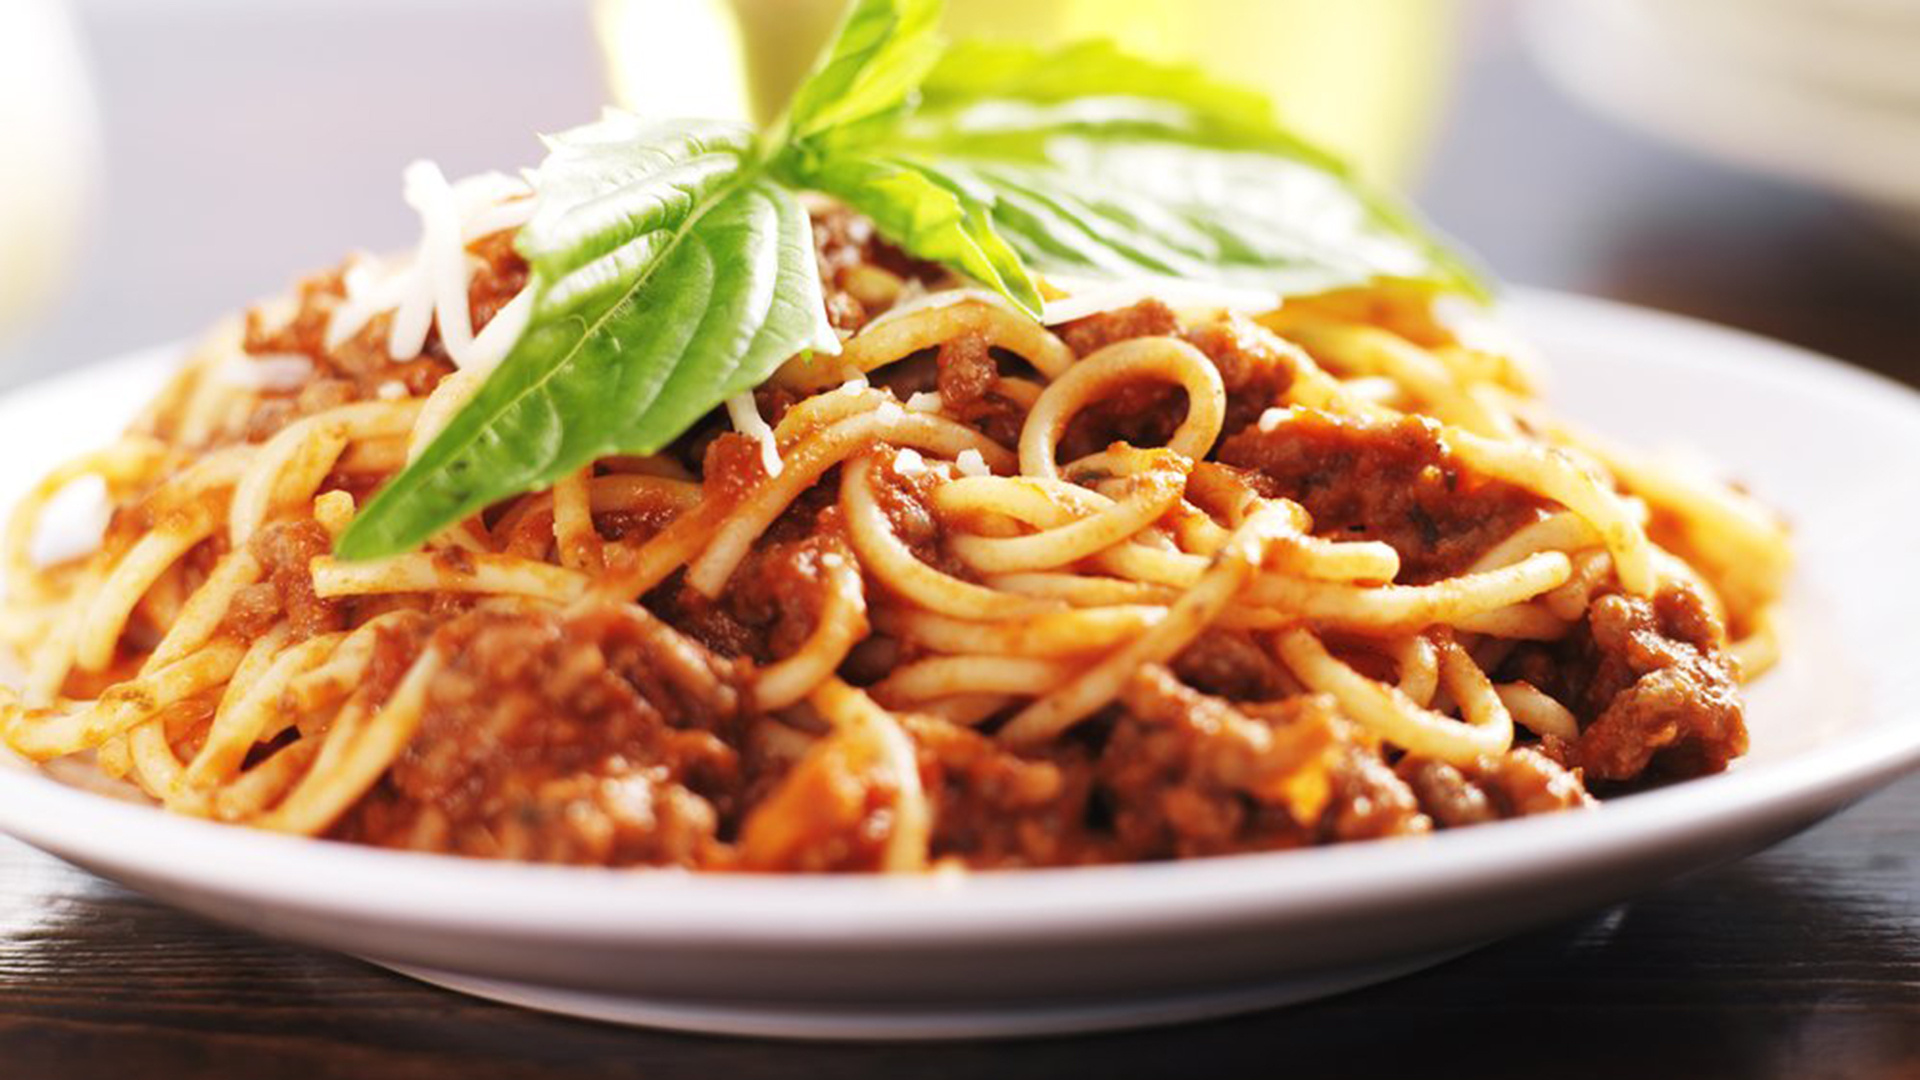 Pasta: Dishes can be vegetarian or include ingredients like meat, seafood, or vegetables. 1920x1080 Full HD Background.